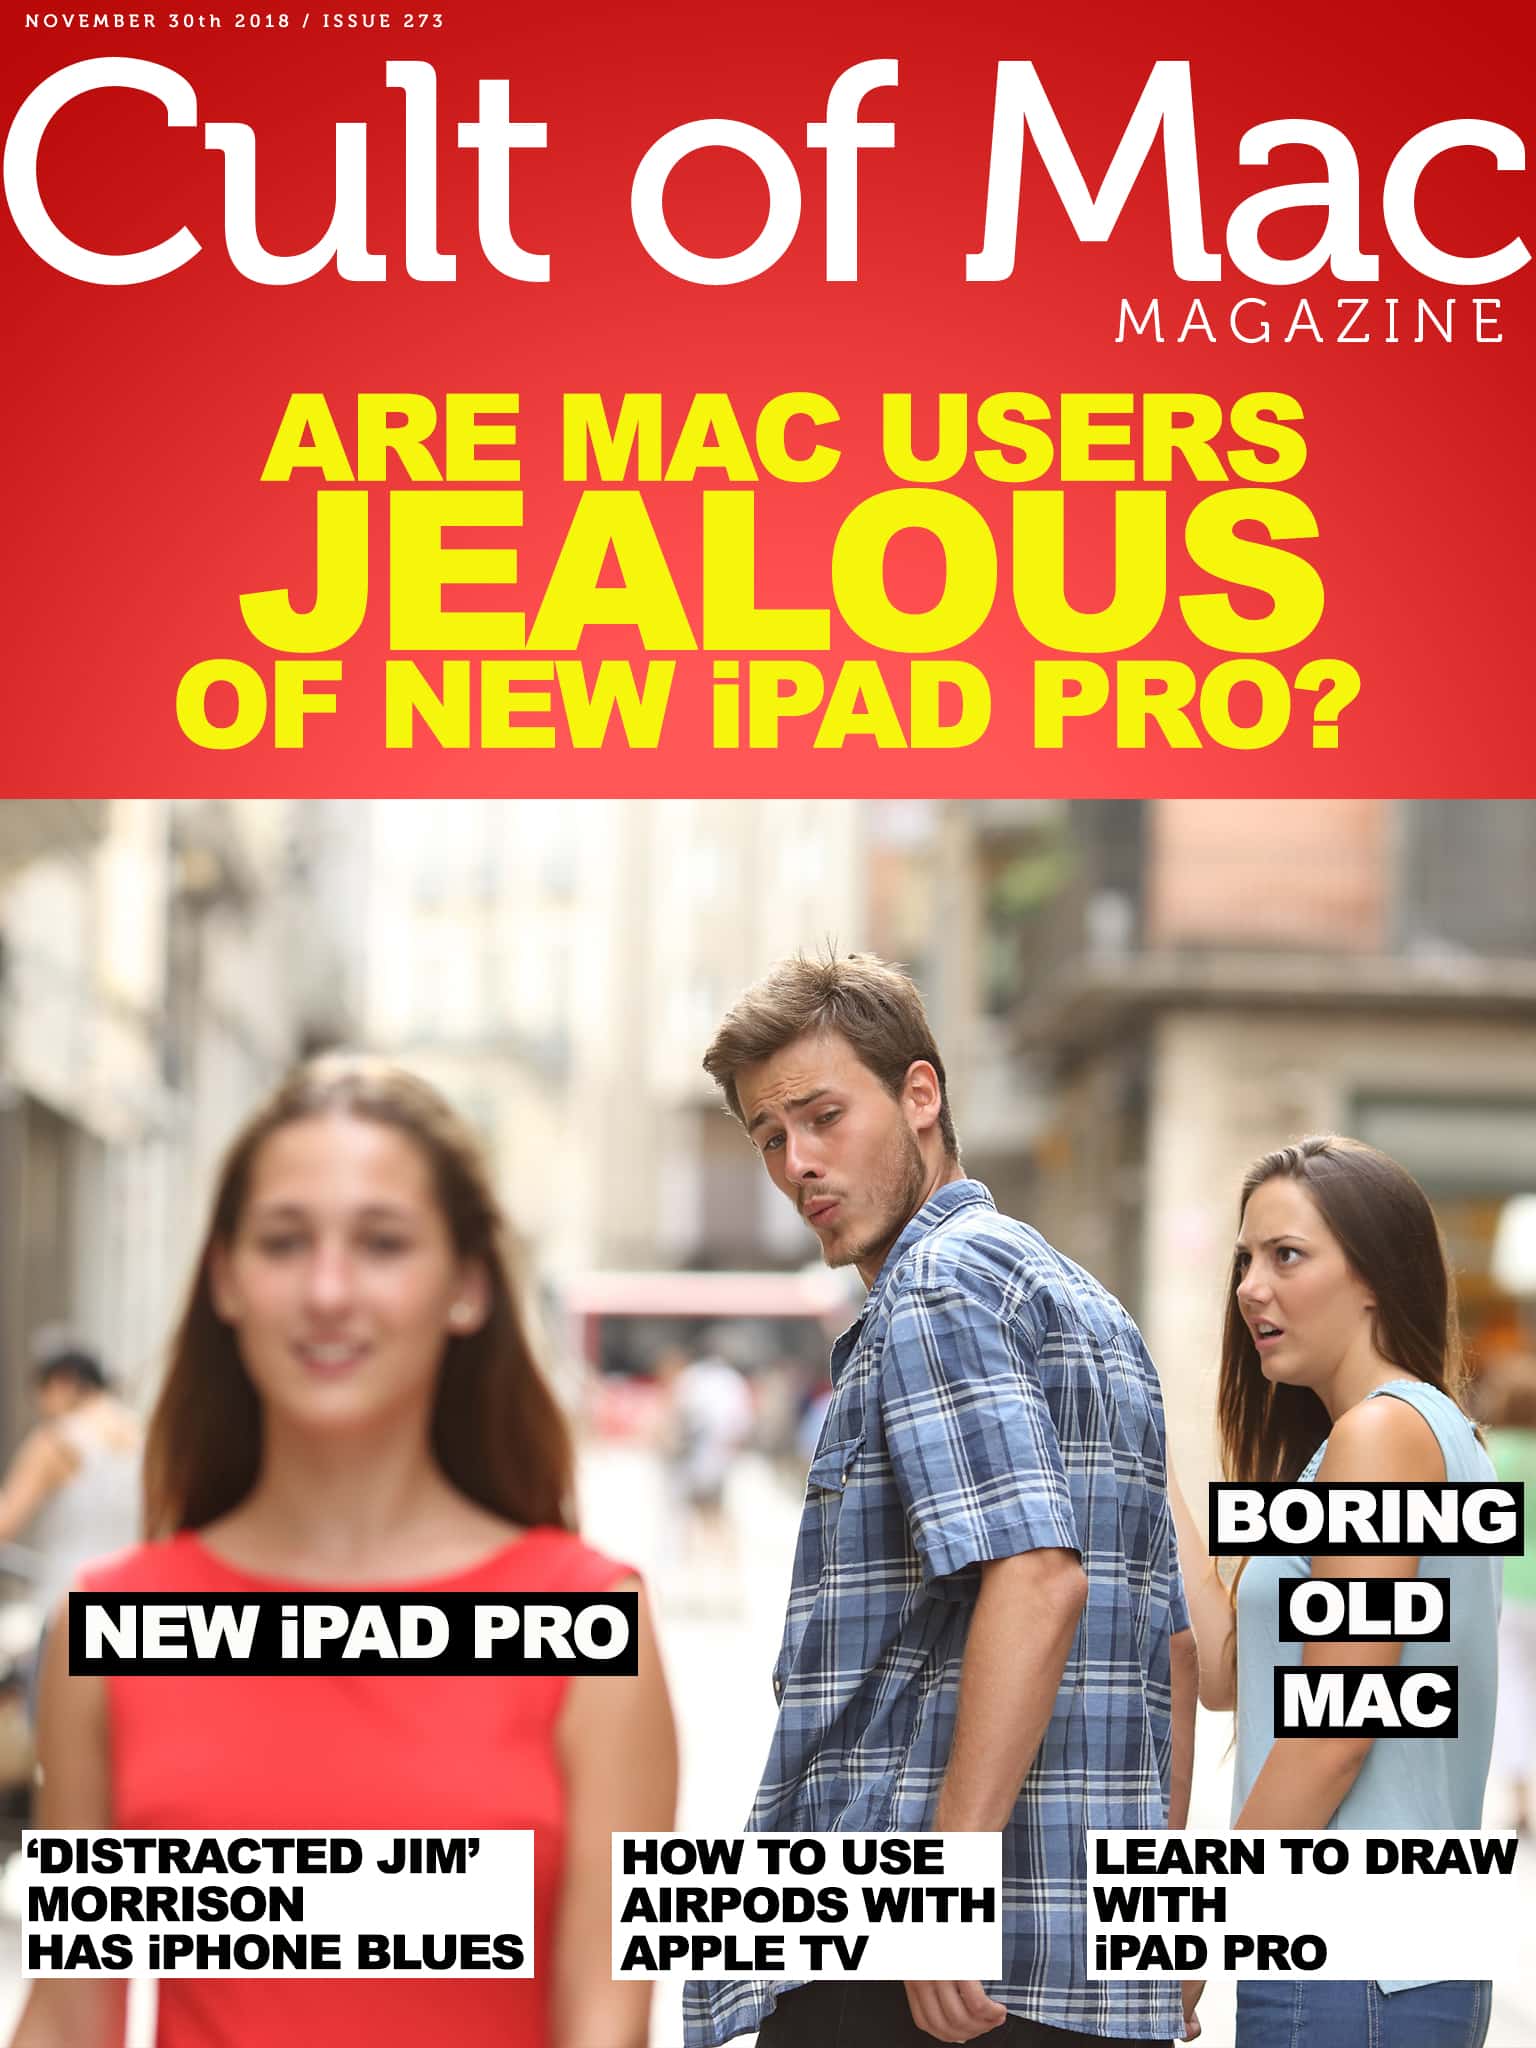 iPad Pro jealousy and regret in Cult of Mac Magazine No. 273.